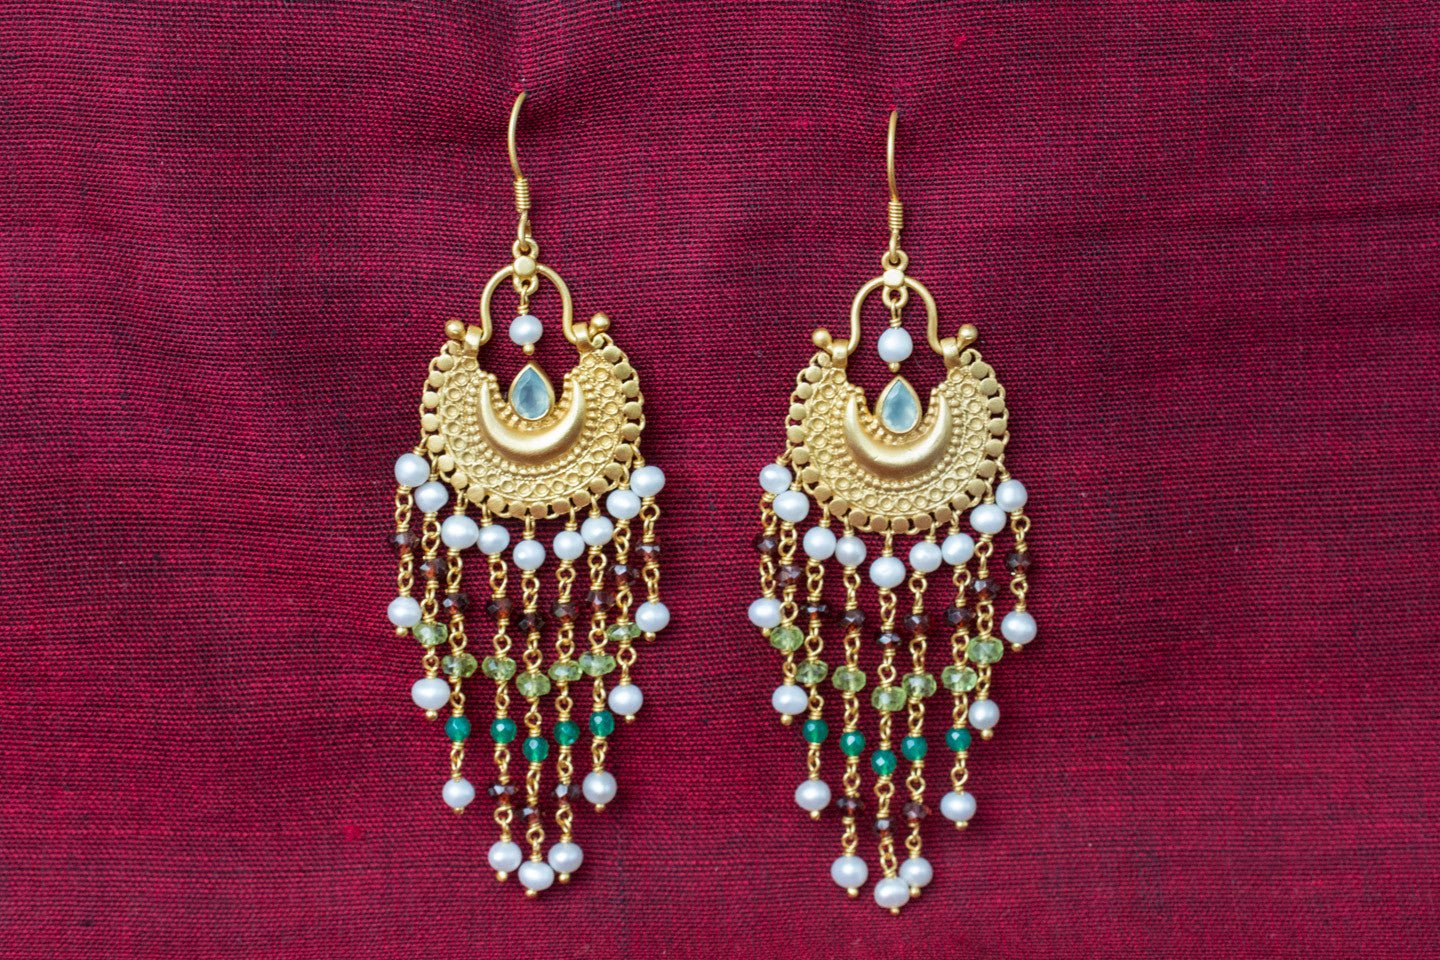 20a472-silver-gold-plated-amrapali-earrings-multi-color-multi-stone